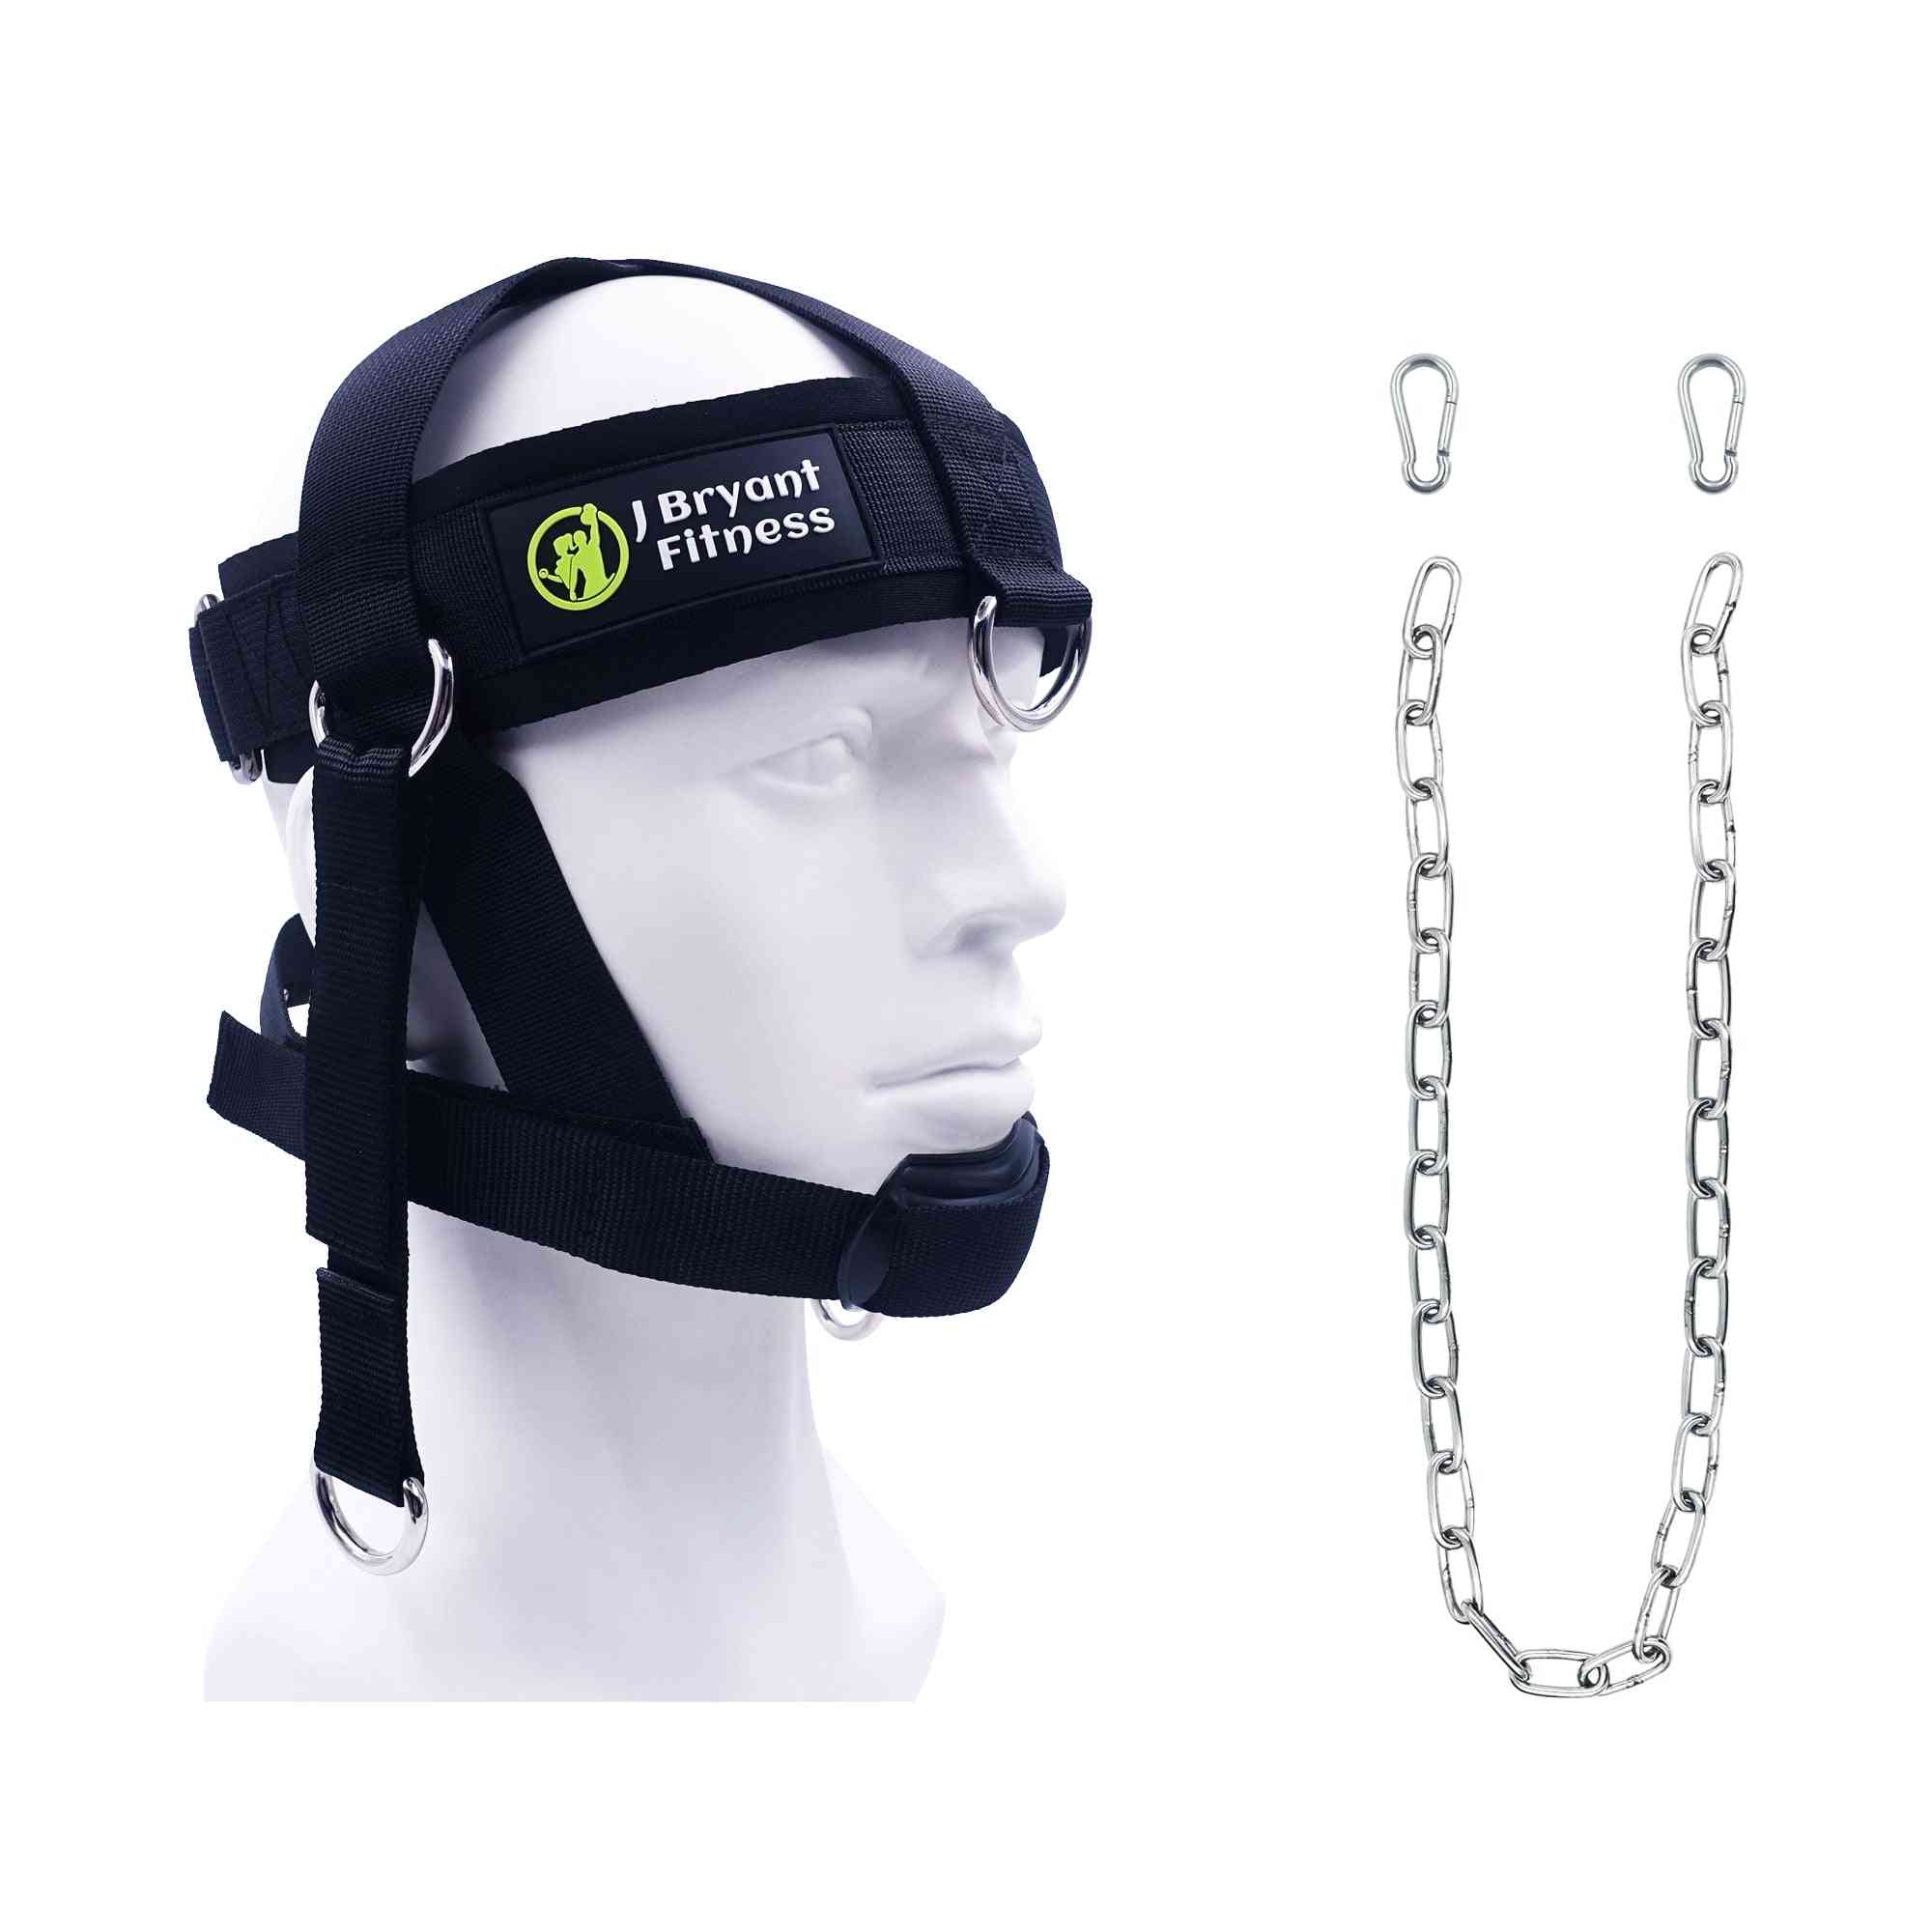 Head Neck Harness For Weight Lifting Training Diverse